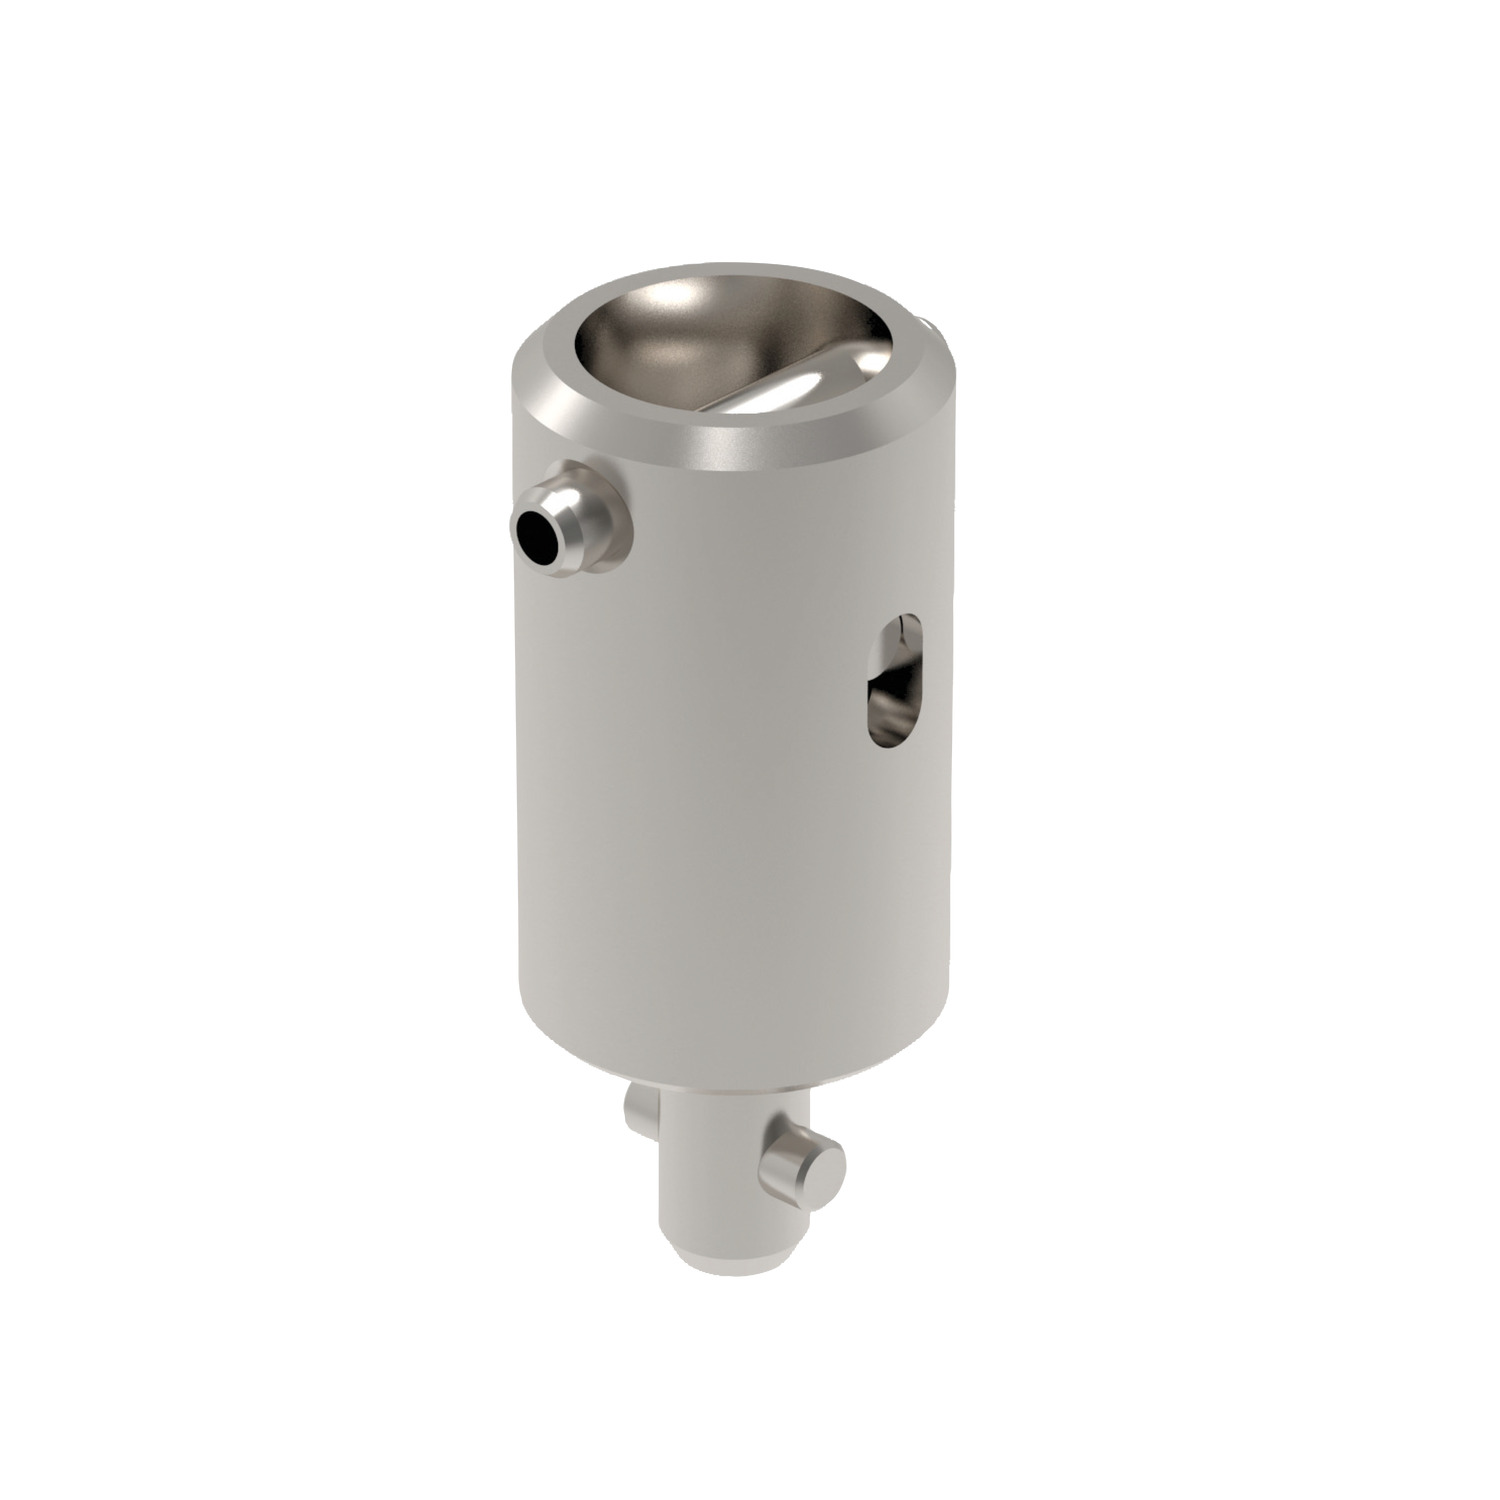 Quick Plug Coupling - Cam Locking Cam locking quick plug couplings, actuated via 90° turn. Suitable for use in pneumatic and hydraulic lifting cylinders.